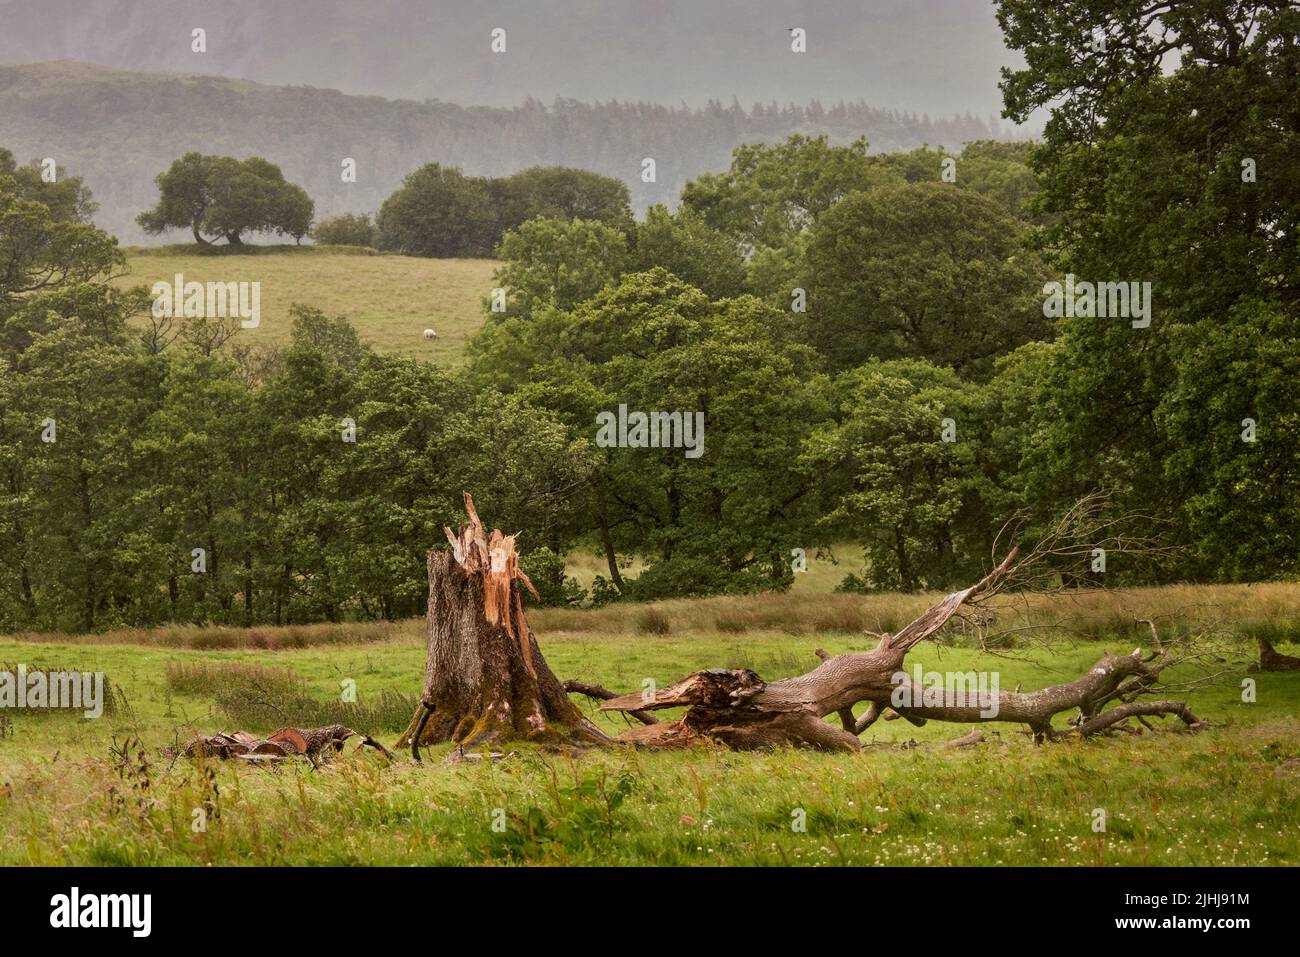 The pub walk in the Lake District, Cumbria in northwest England,  A damaged tree in a filed Stock Photo